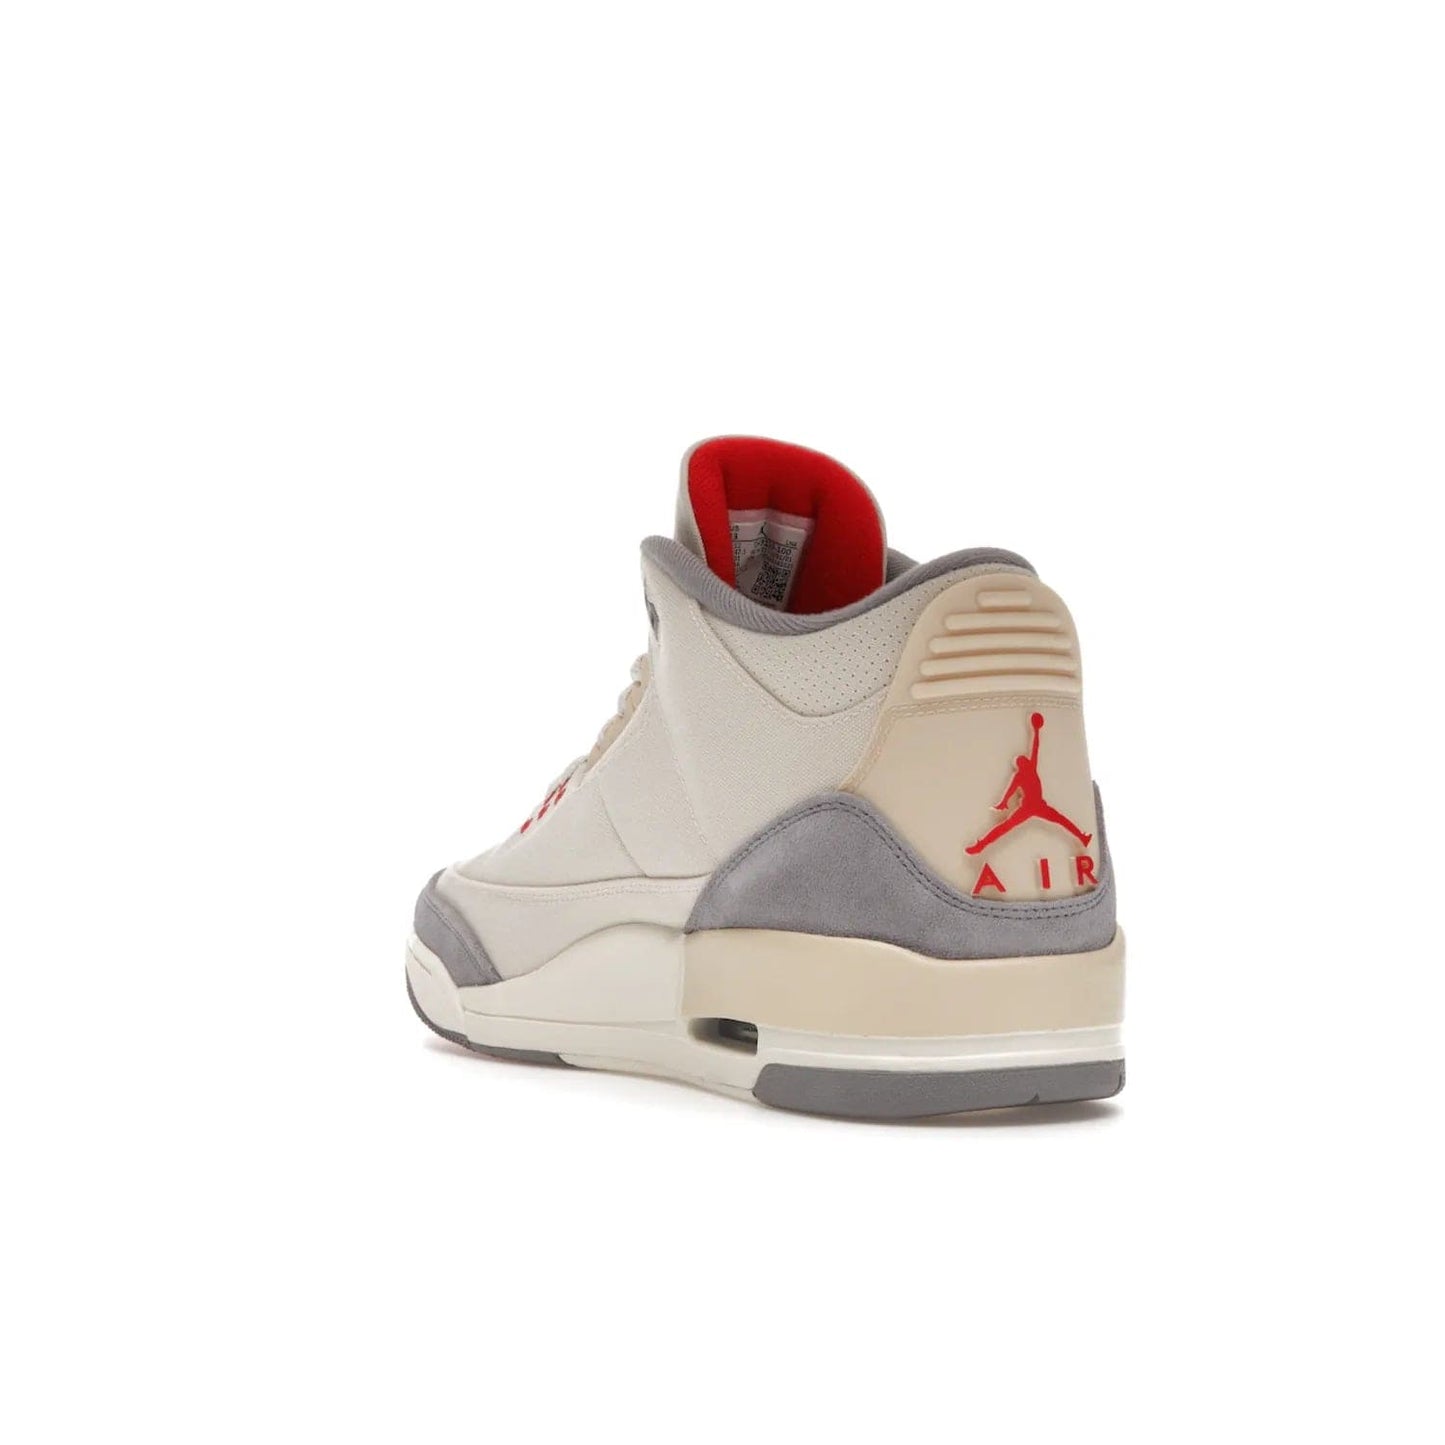 Jordan 3 Retro Muslin - Image 25 - Only at www.BallersClubKickz.com - Eye-catching Air Jordan 3 Retro Muslin in a neutral palette of grey, cream, and red. Featuring canvas upper, suede overlays and white/grey Air Max sole. Available in March 2022.